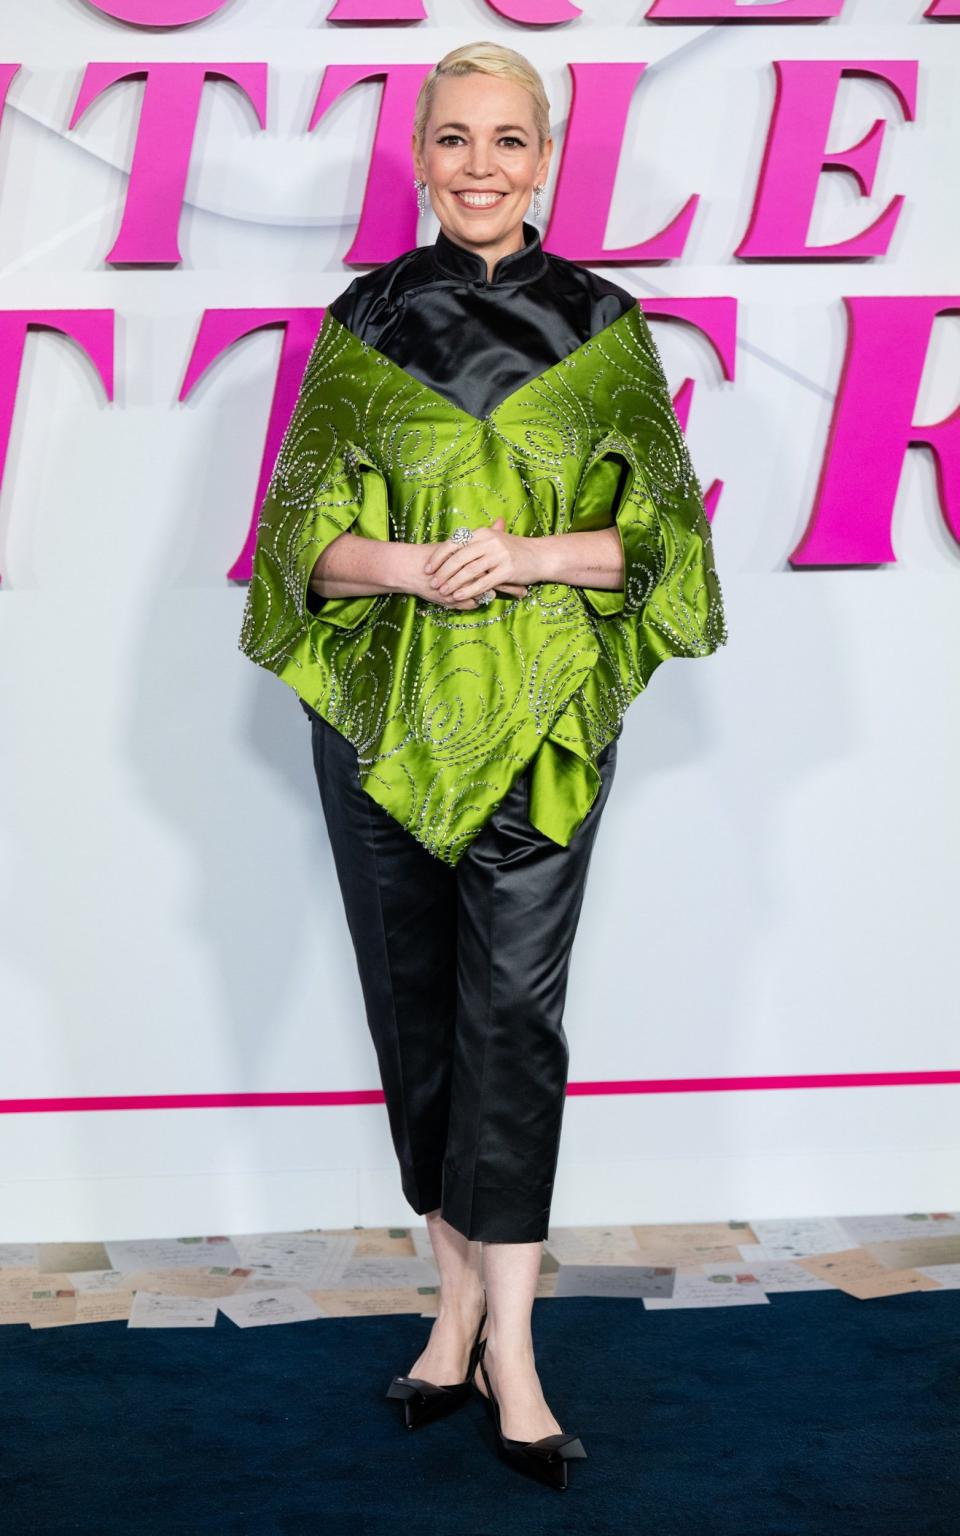 Olivia Colman's black and green Prada look at the premiere of Wicked Little Letters in London featured a mandarin collar